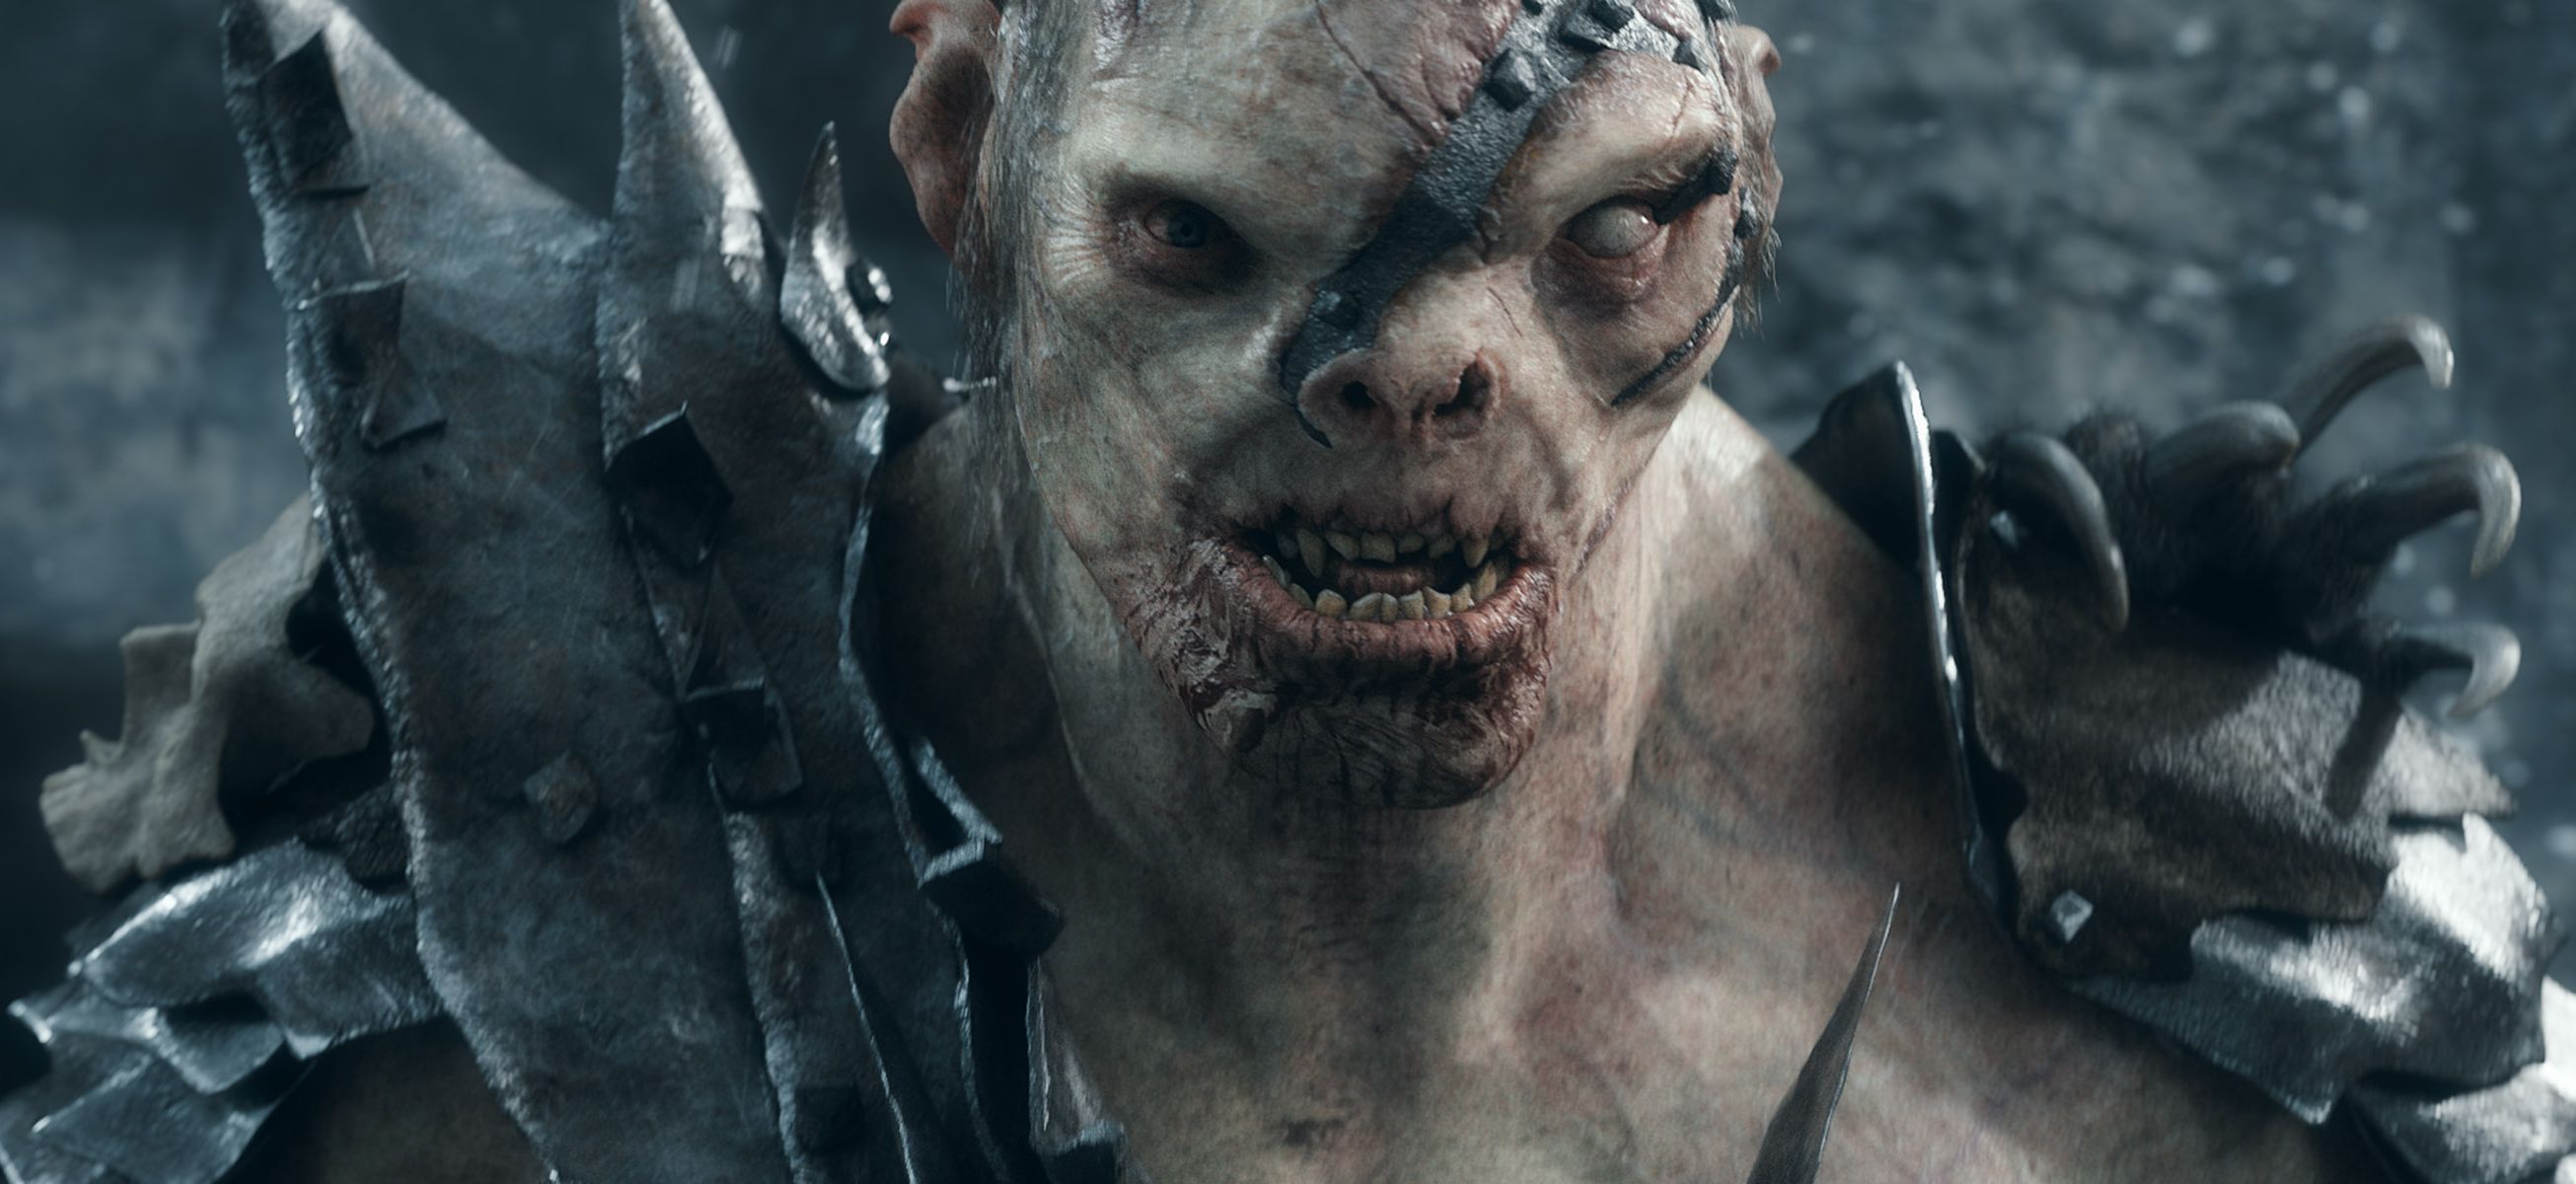 White-eyed Orc - The Battle of the Five Armies 